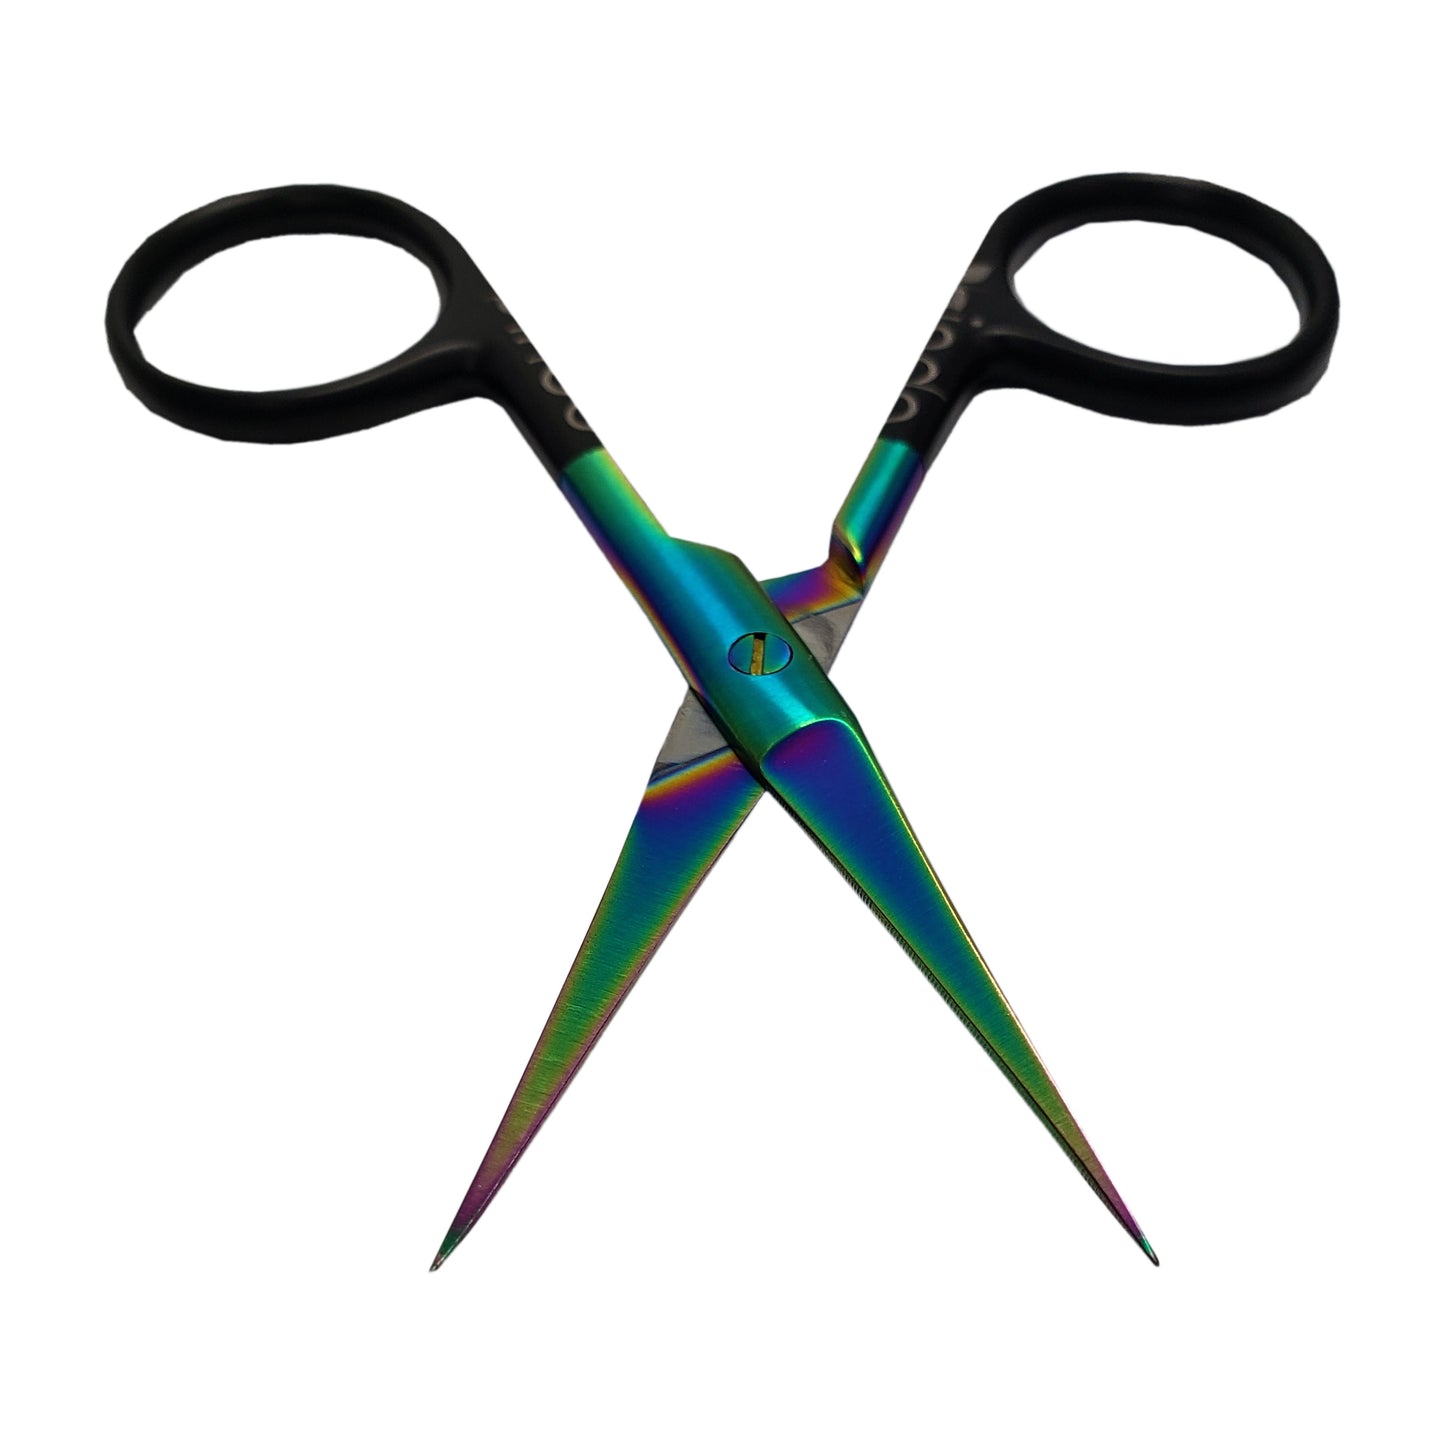 Easy Root and Cloning Scissors - Cloning and Rooting Hormone Plus Razor Sharp Snips for Cloning or Trimming